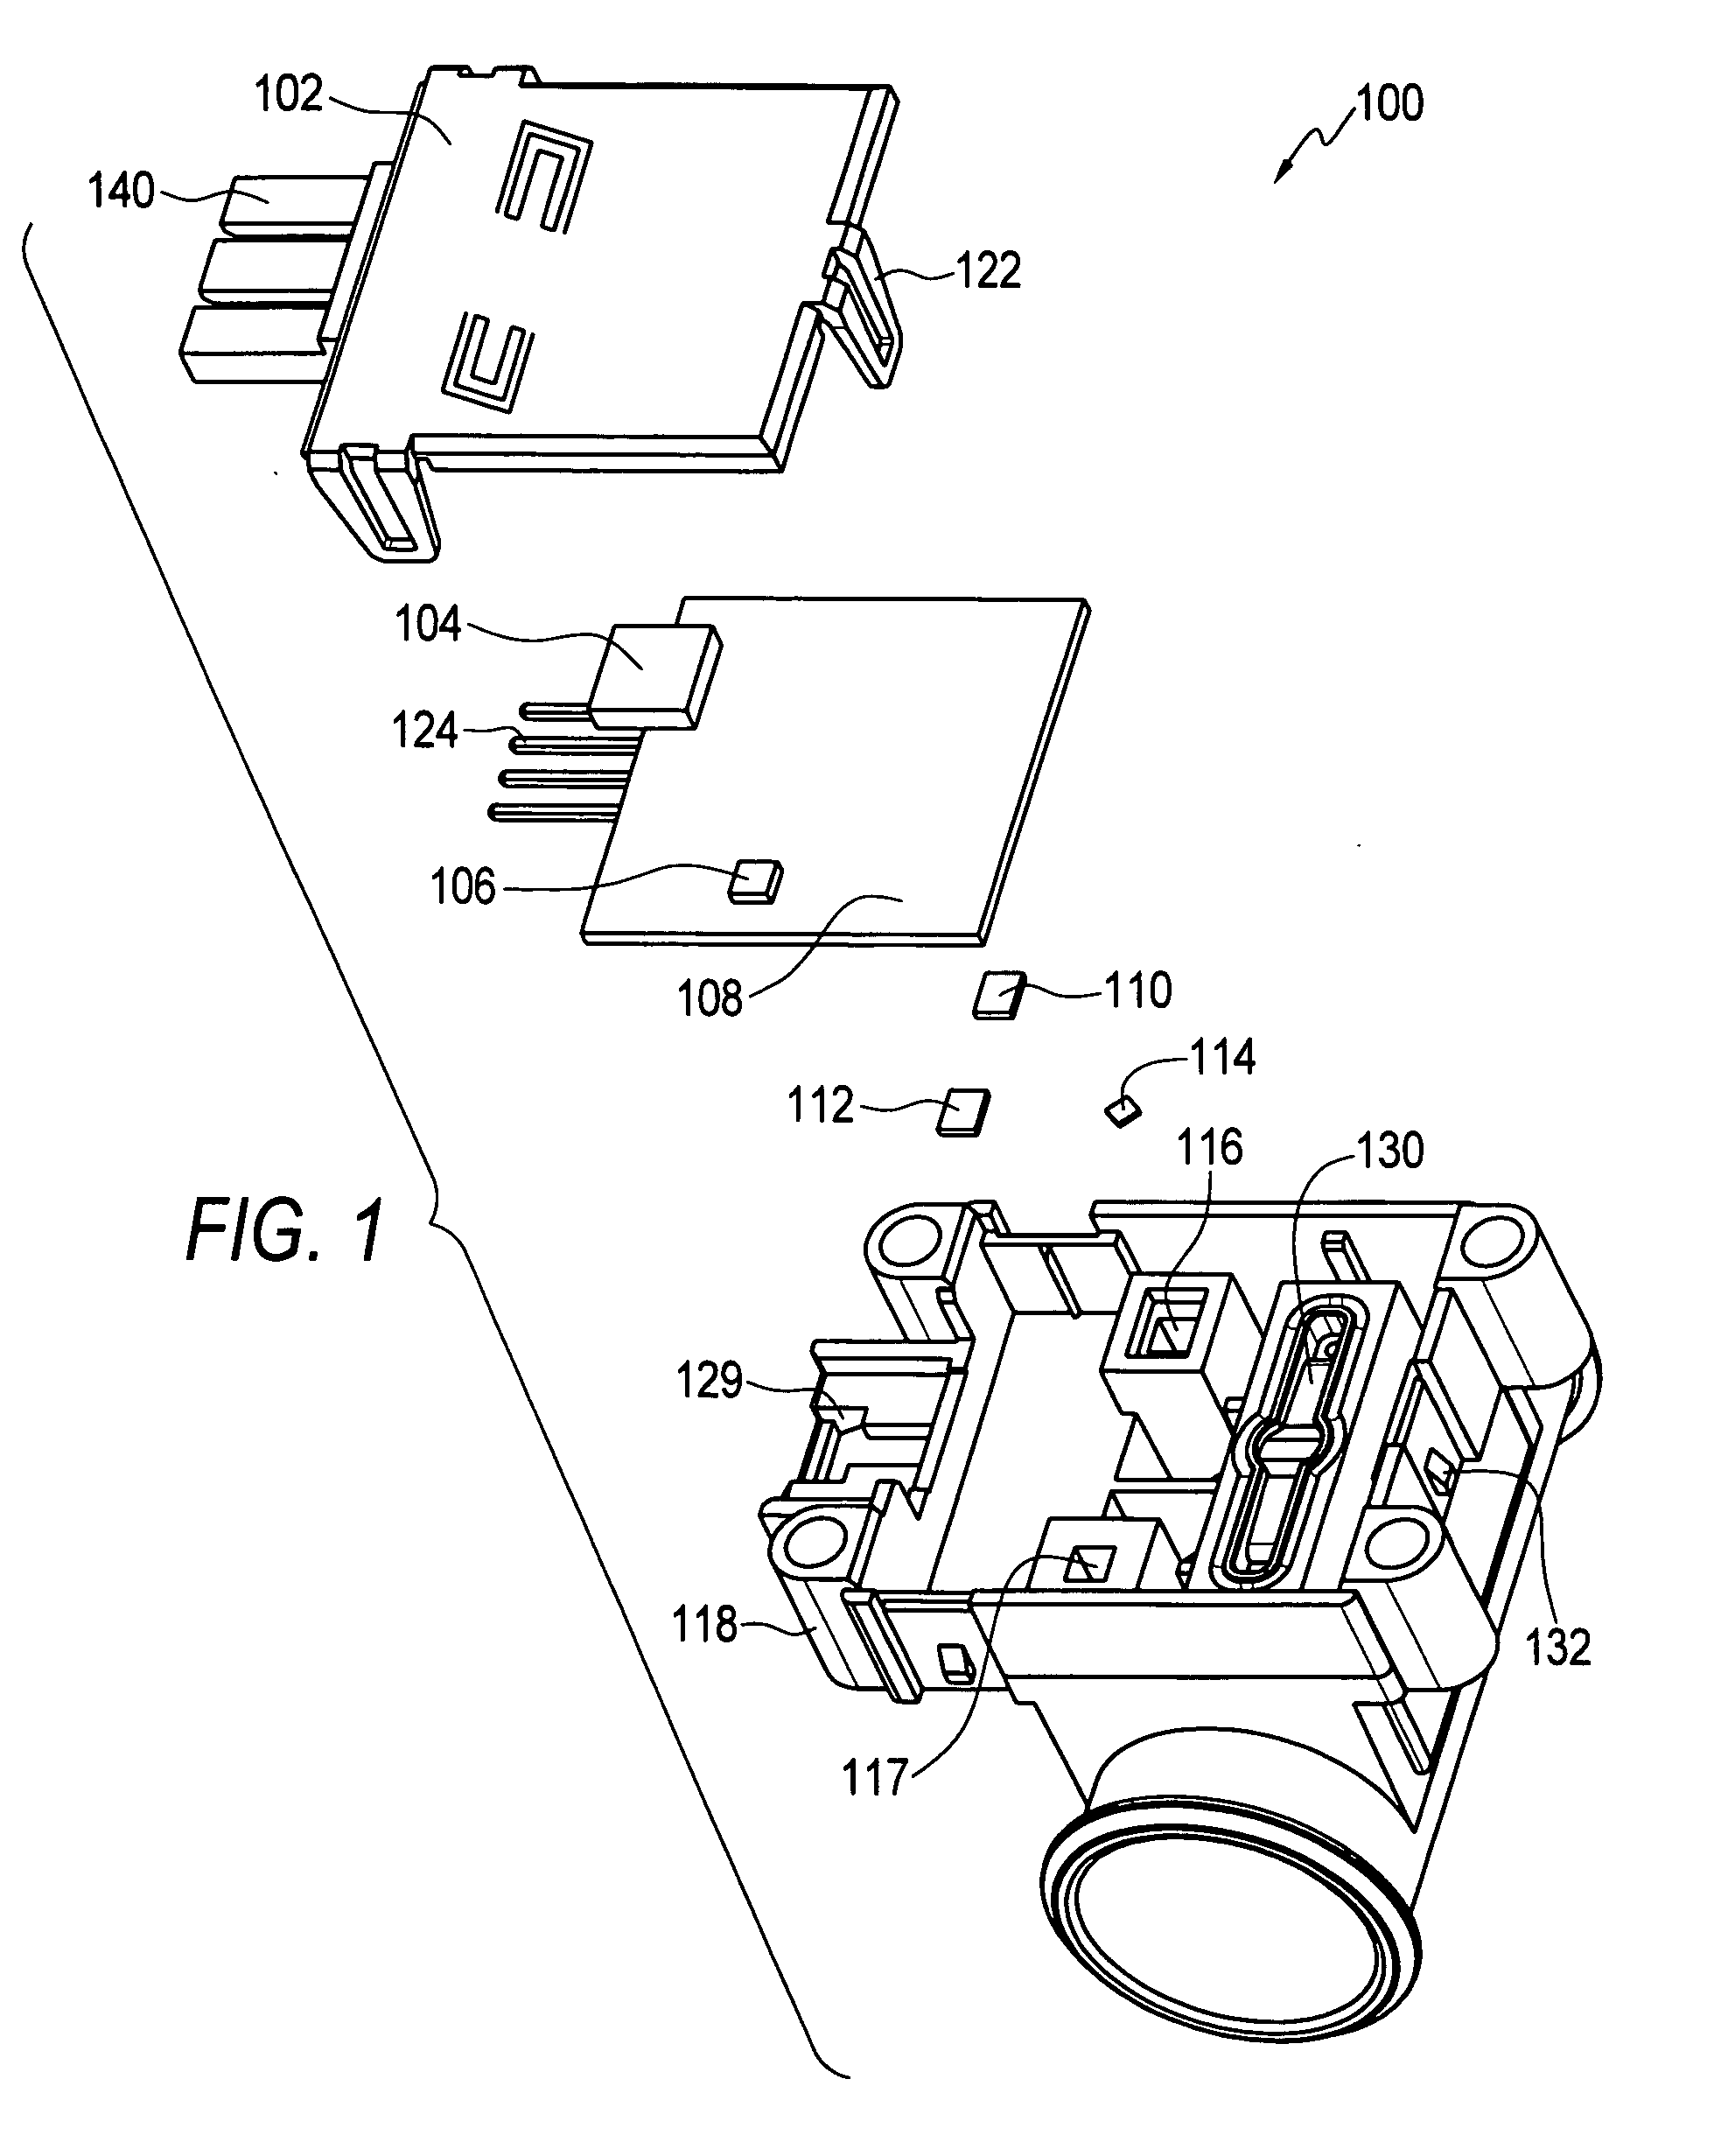 Packaging methods and systems for measuring multiple measurands including bi-directional flow